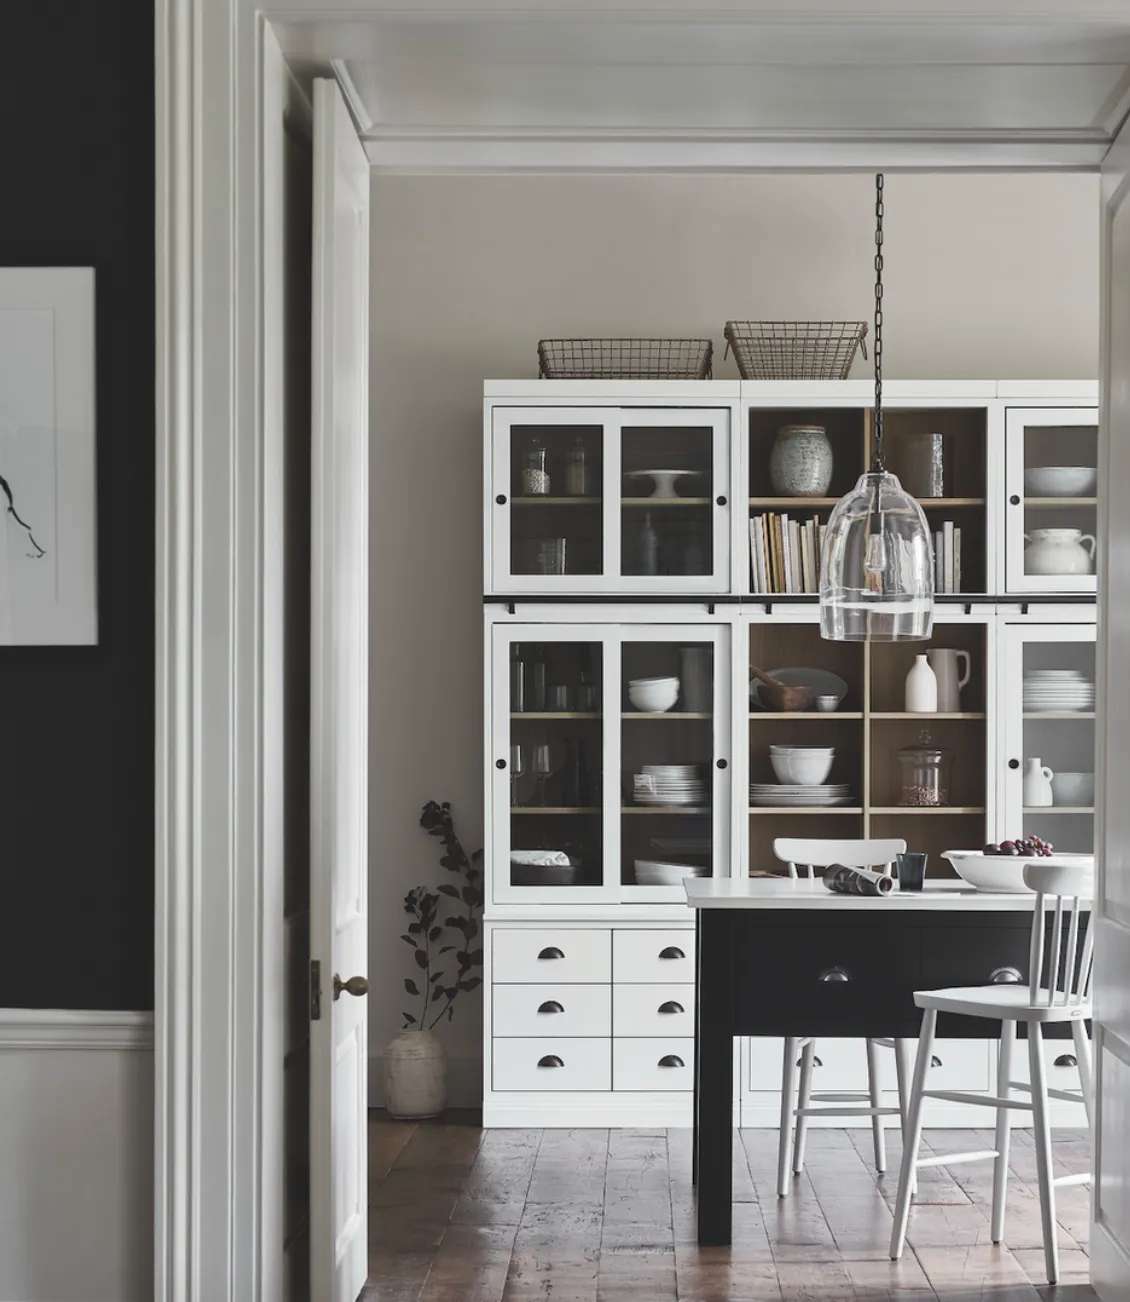 If you’re looking for adaptable kitchen storage, Neptune’s bespoke Chawton in Snow, priced from £1,897, can be added to over time, or broken down into multiple pieces when you move home